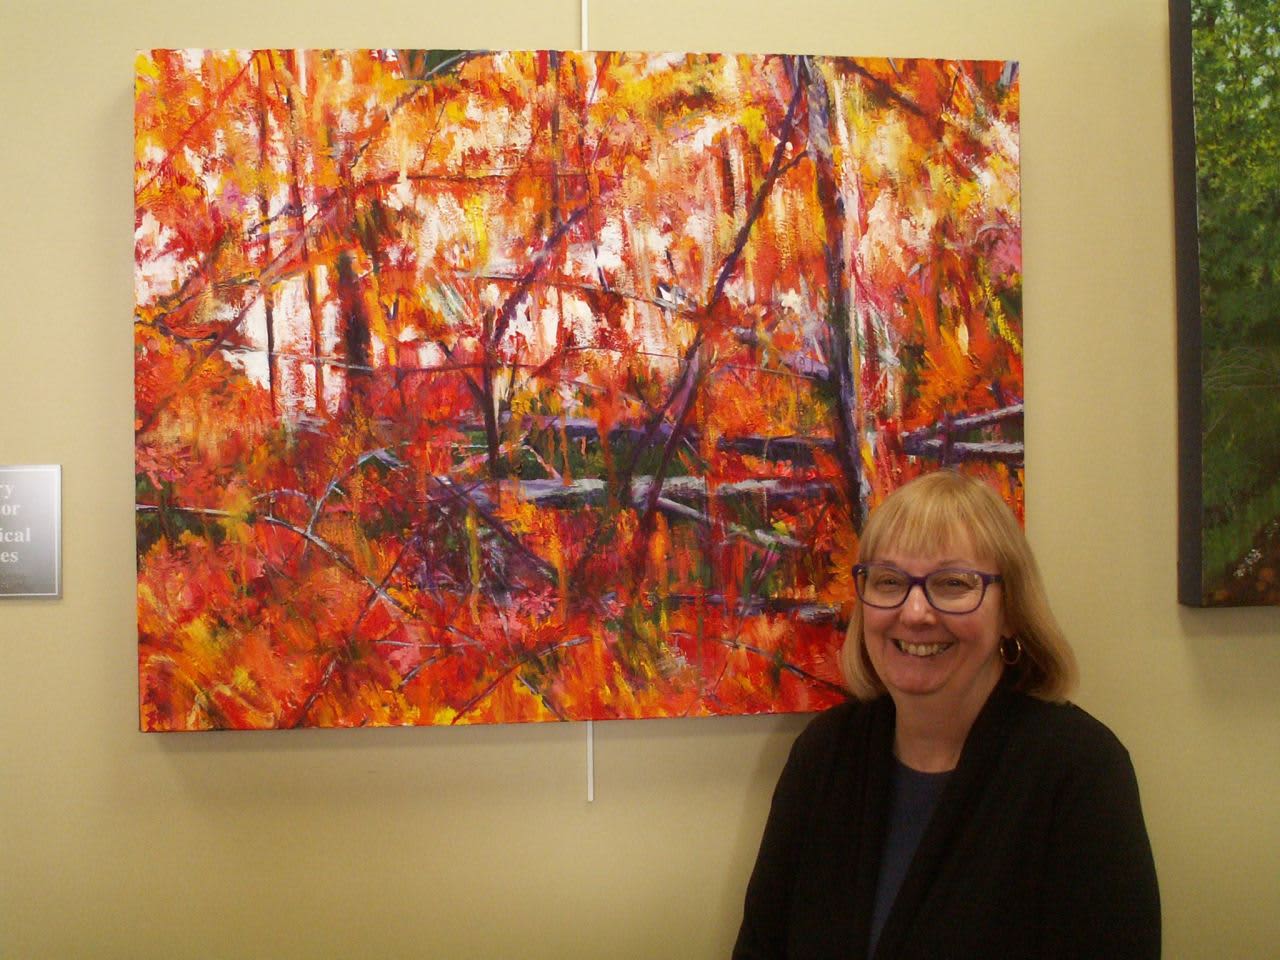 Paintings by Kathryn Morrill are on view March 6 - April 29 in the exhibit "Growing" at the Pine Gallery.